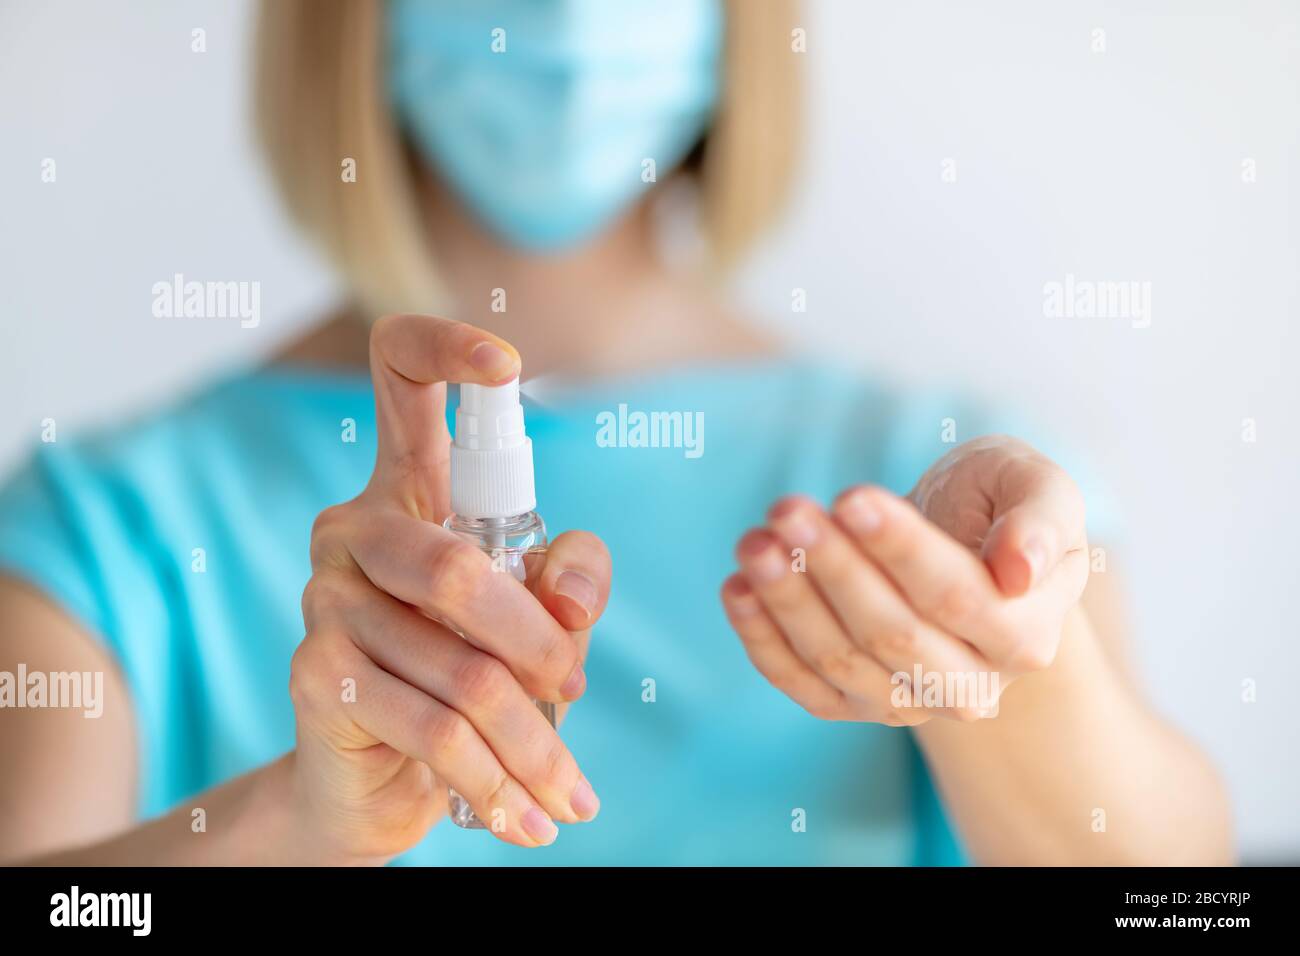 Female doctor or nurse in uniform puts a disinfectant spray on her hands. Disinfection and hand washing. Protection against virus and bacteria Stock Photo